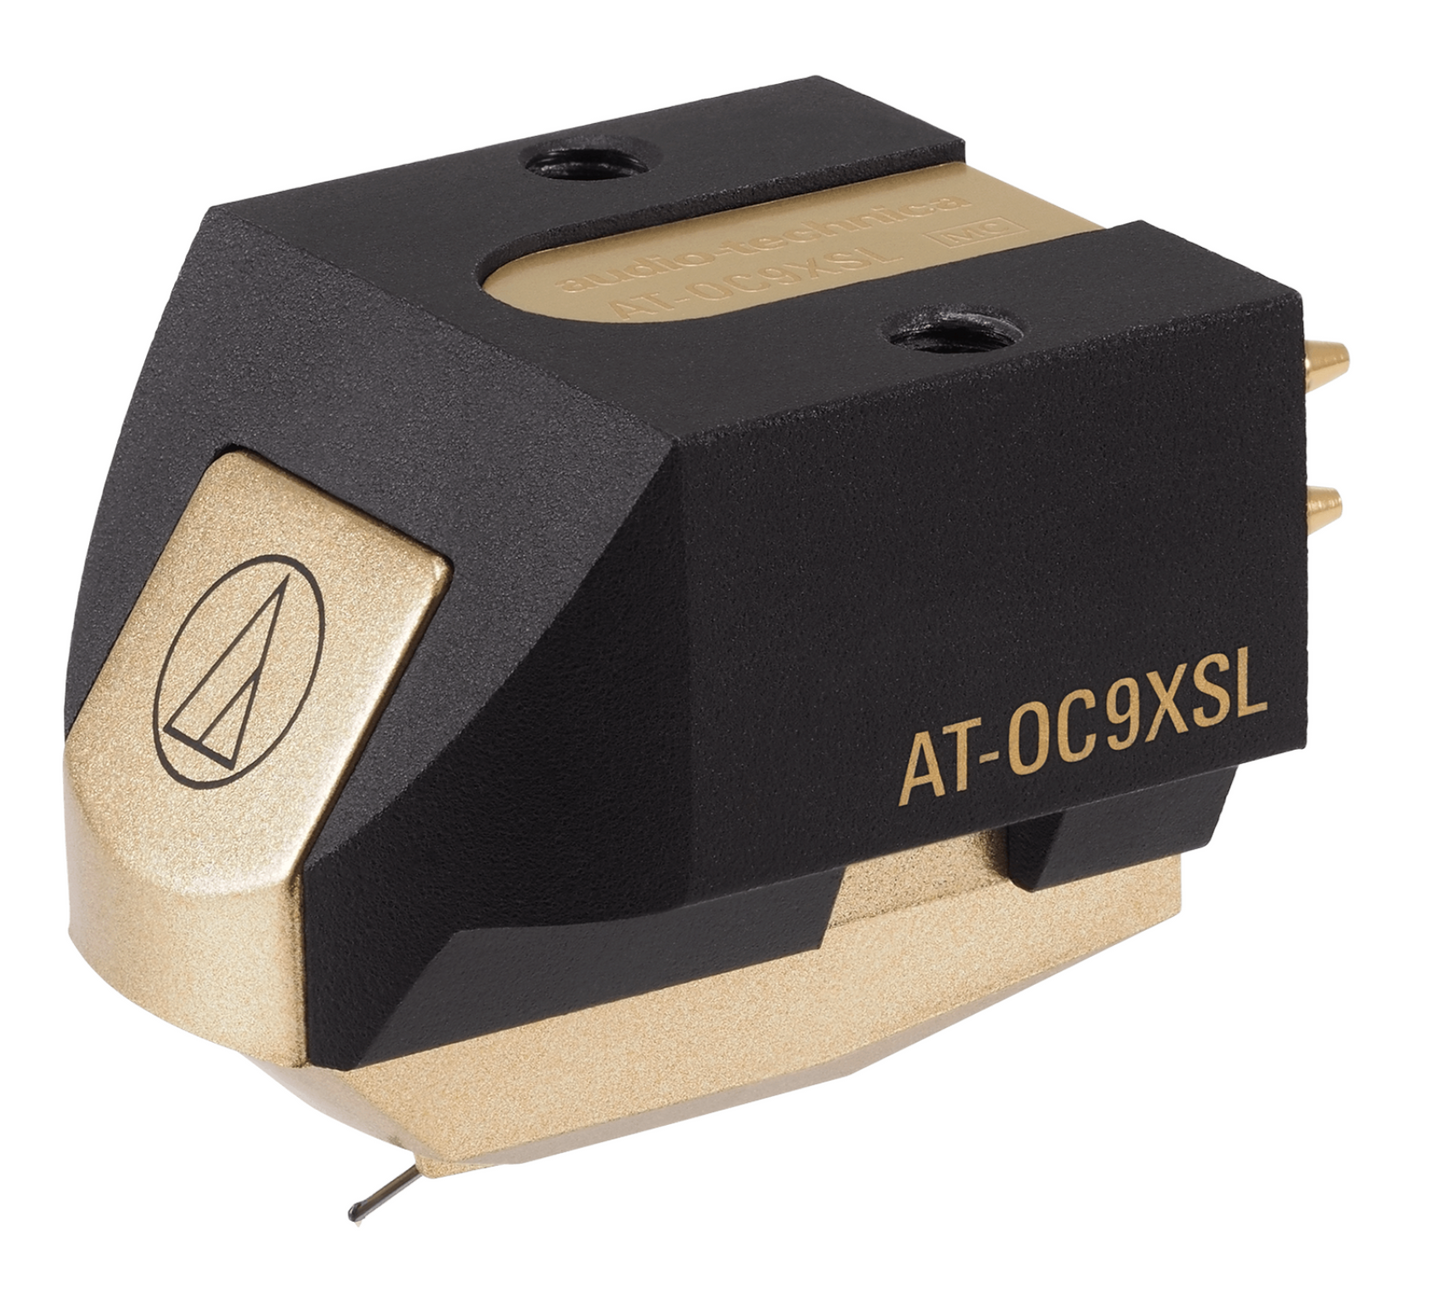 Audio-Technica Cartridges Audio Technica AT-OC9XSL Moving Coil Phono Cartridge, image shows front and side